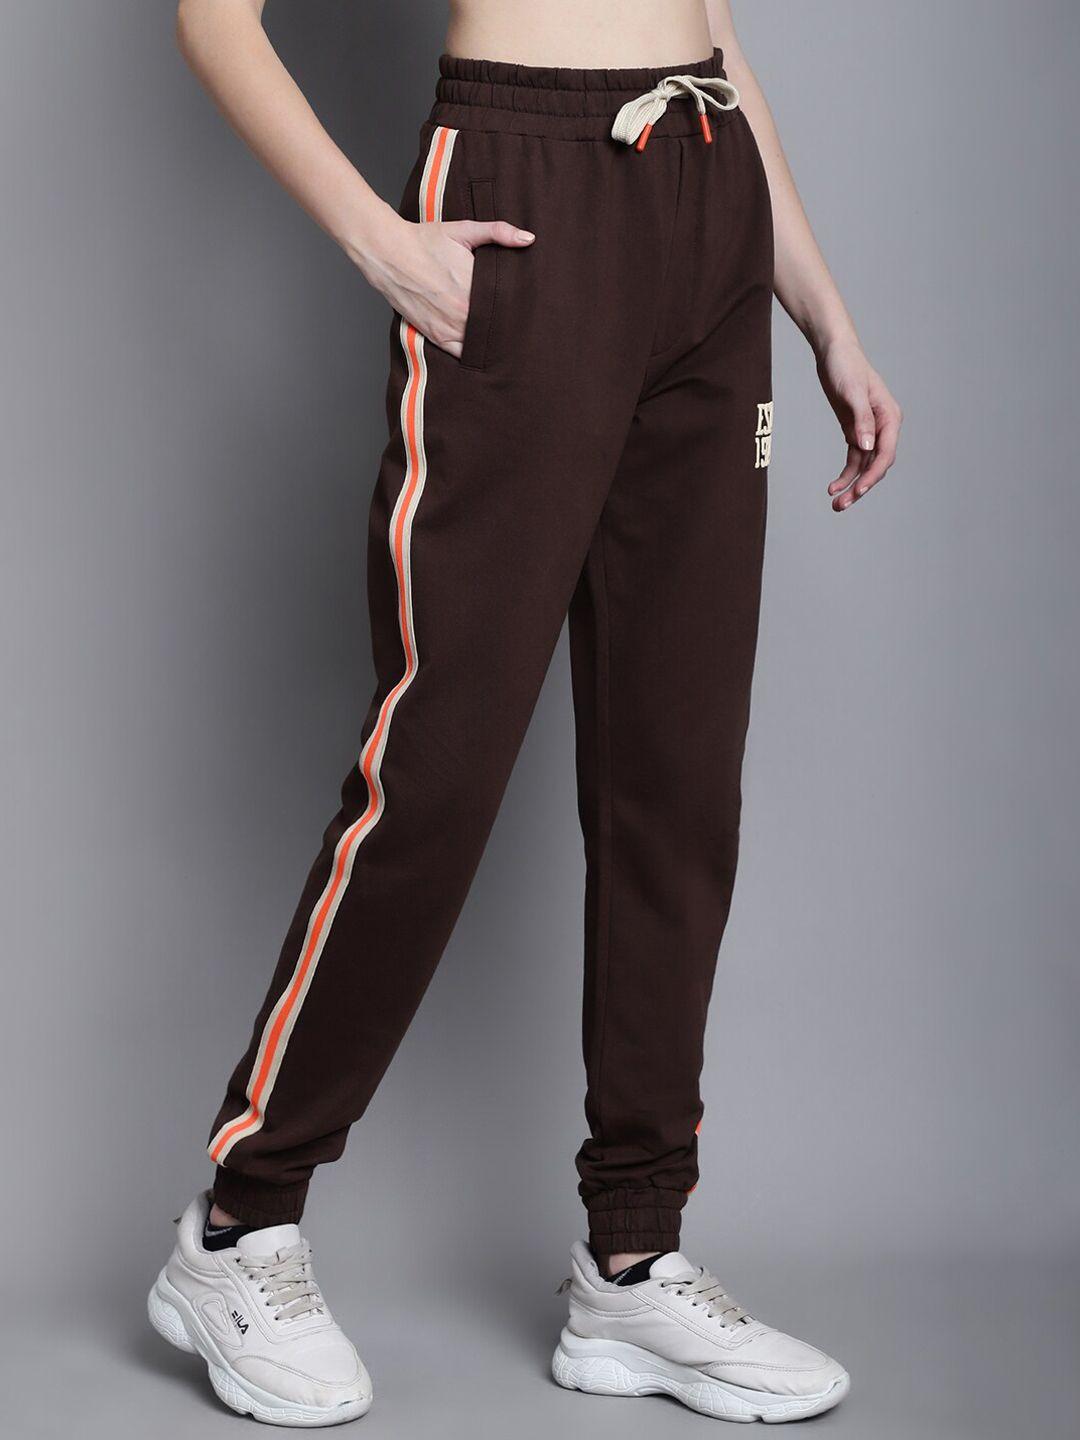 door74-mid-rise-with-side-tape-cotton-joggers